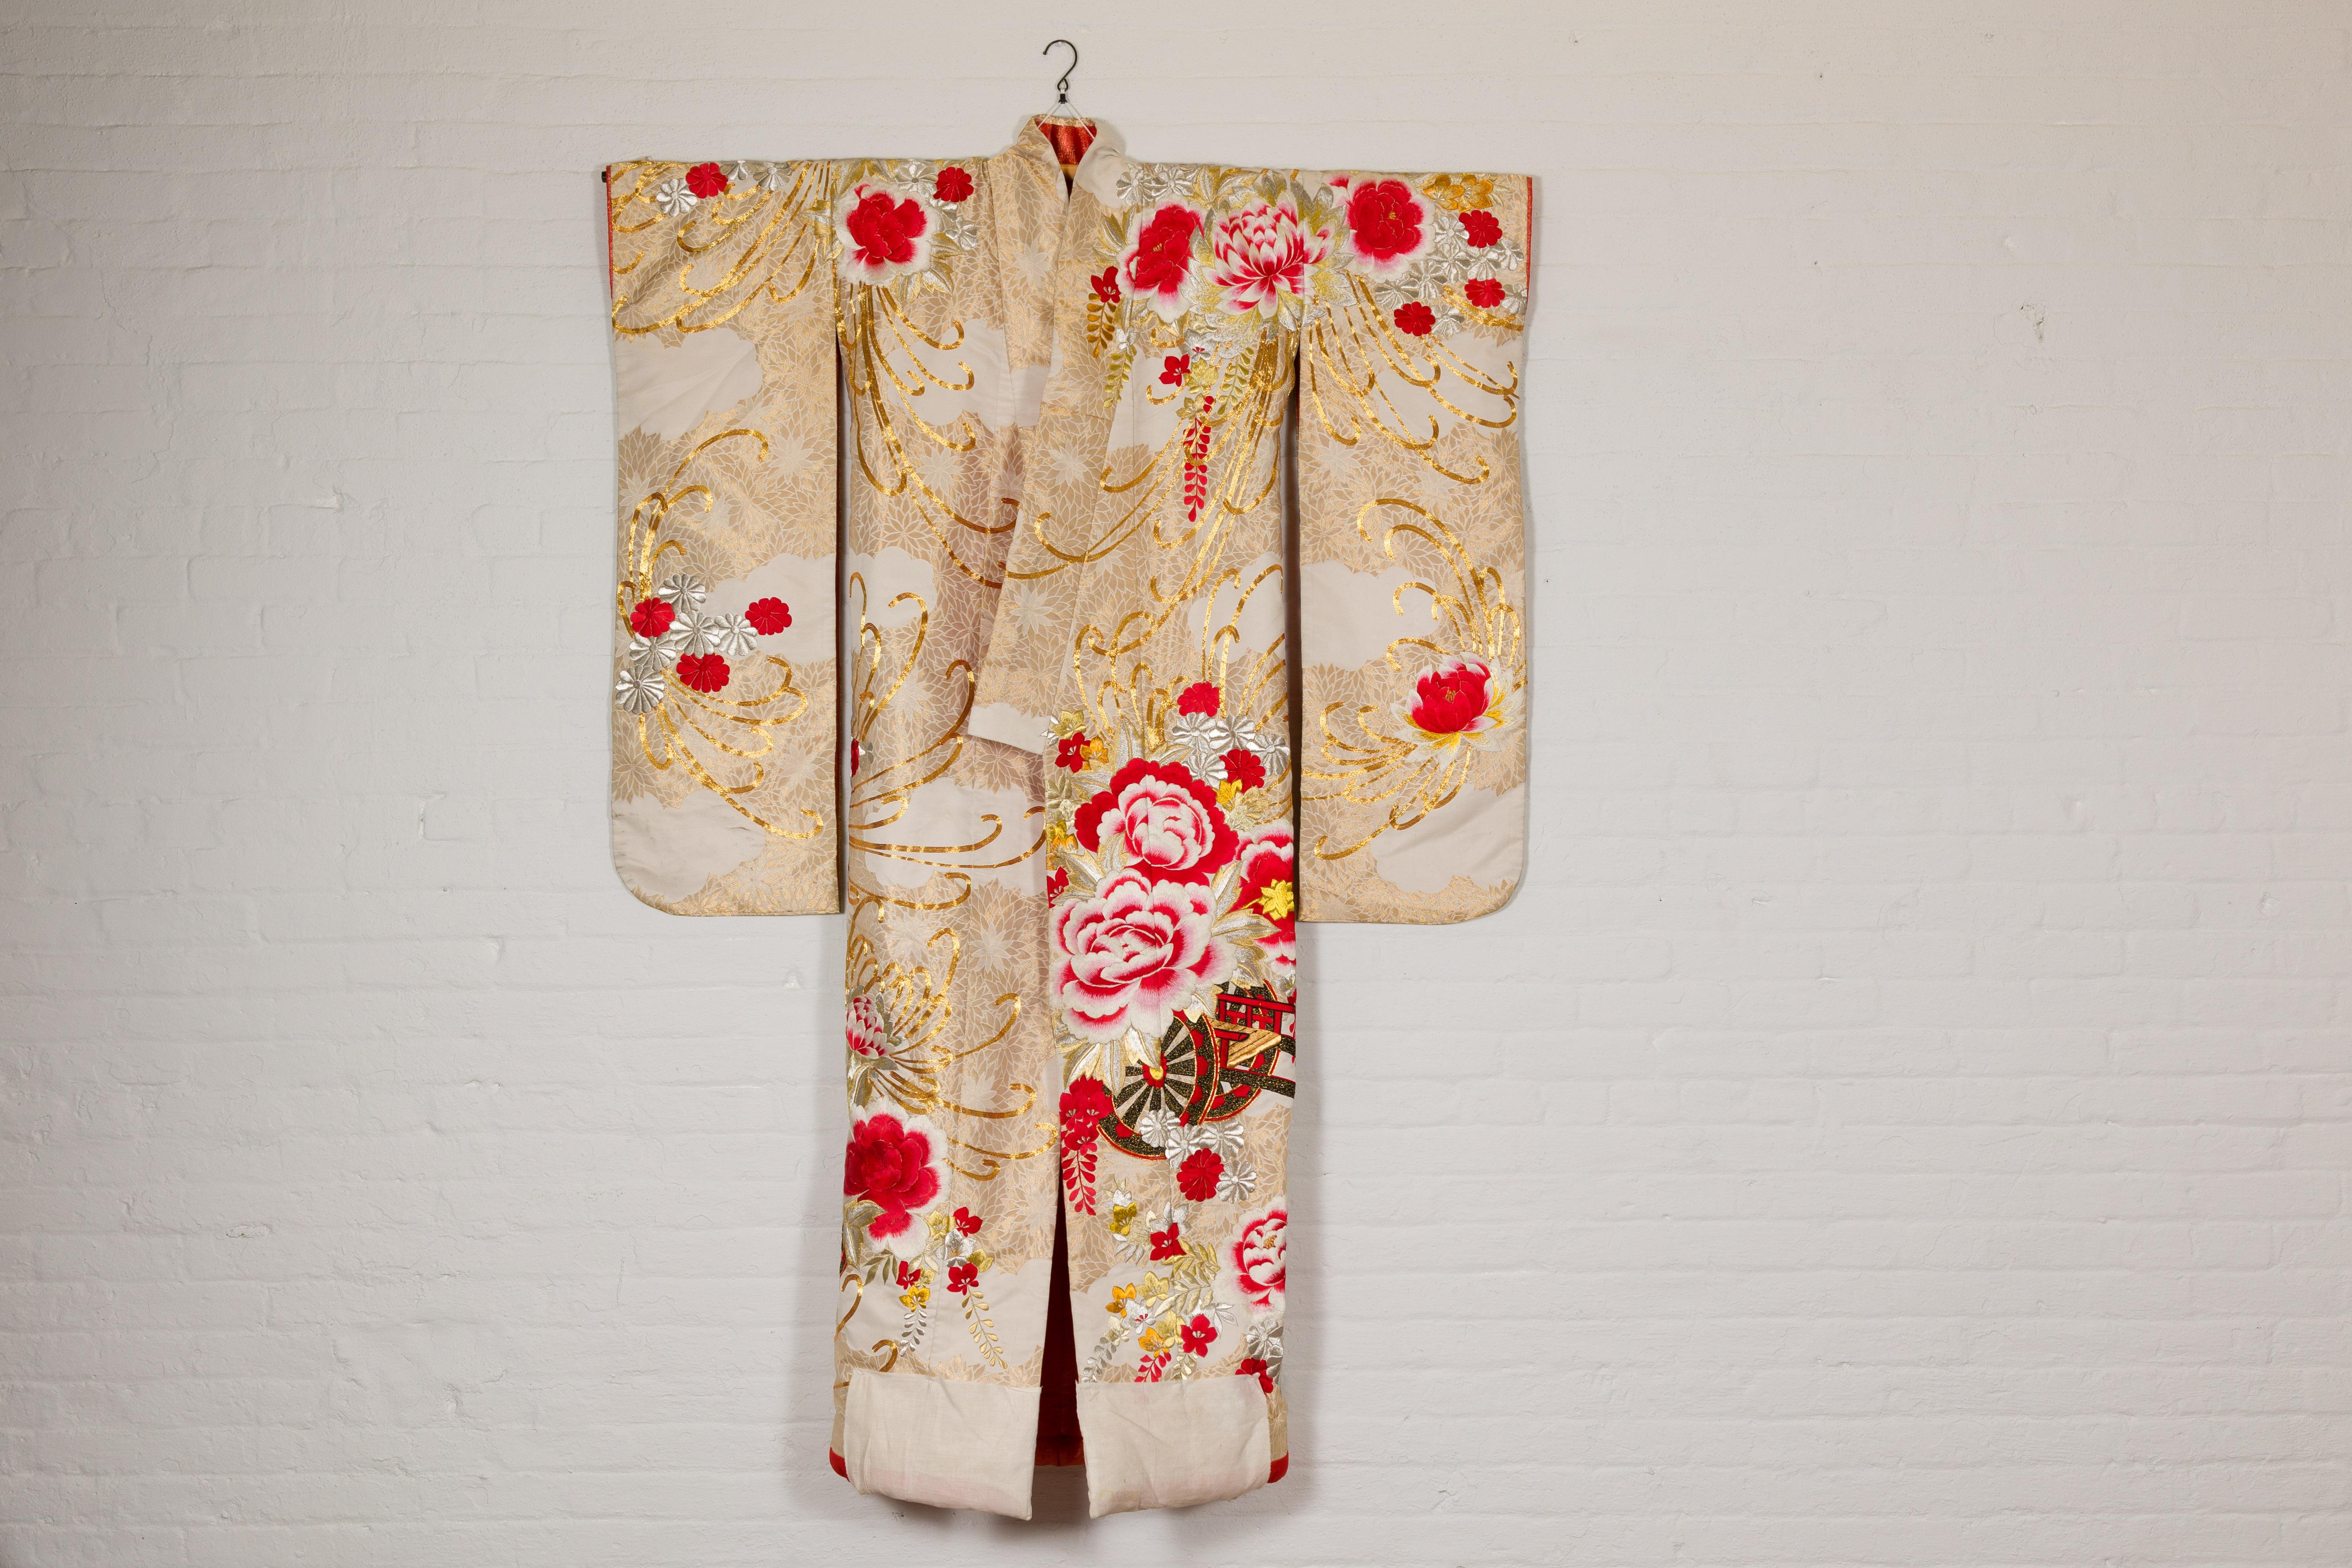 A vintage Japanese Showa era handcrafted silk brocade woman's wedding kimono circa 1940 with intricate hand-embroidered details depicting large flowers and a cart. Steeped in cultural opulence, this vintage Japanese Showa era woman's wedding kimono